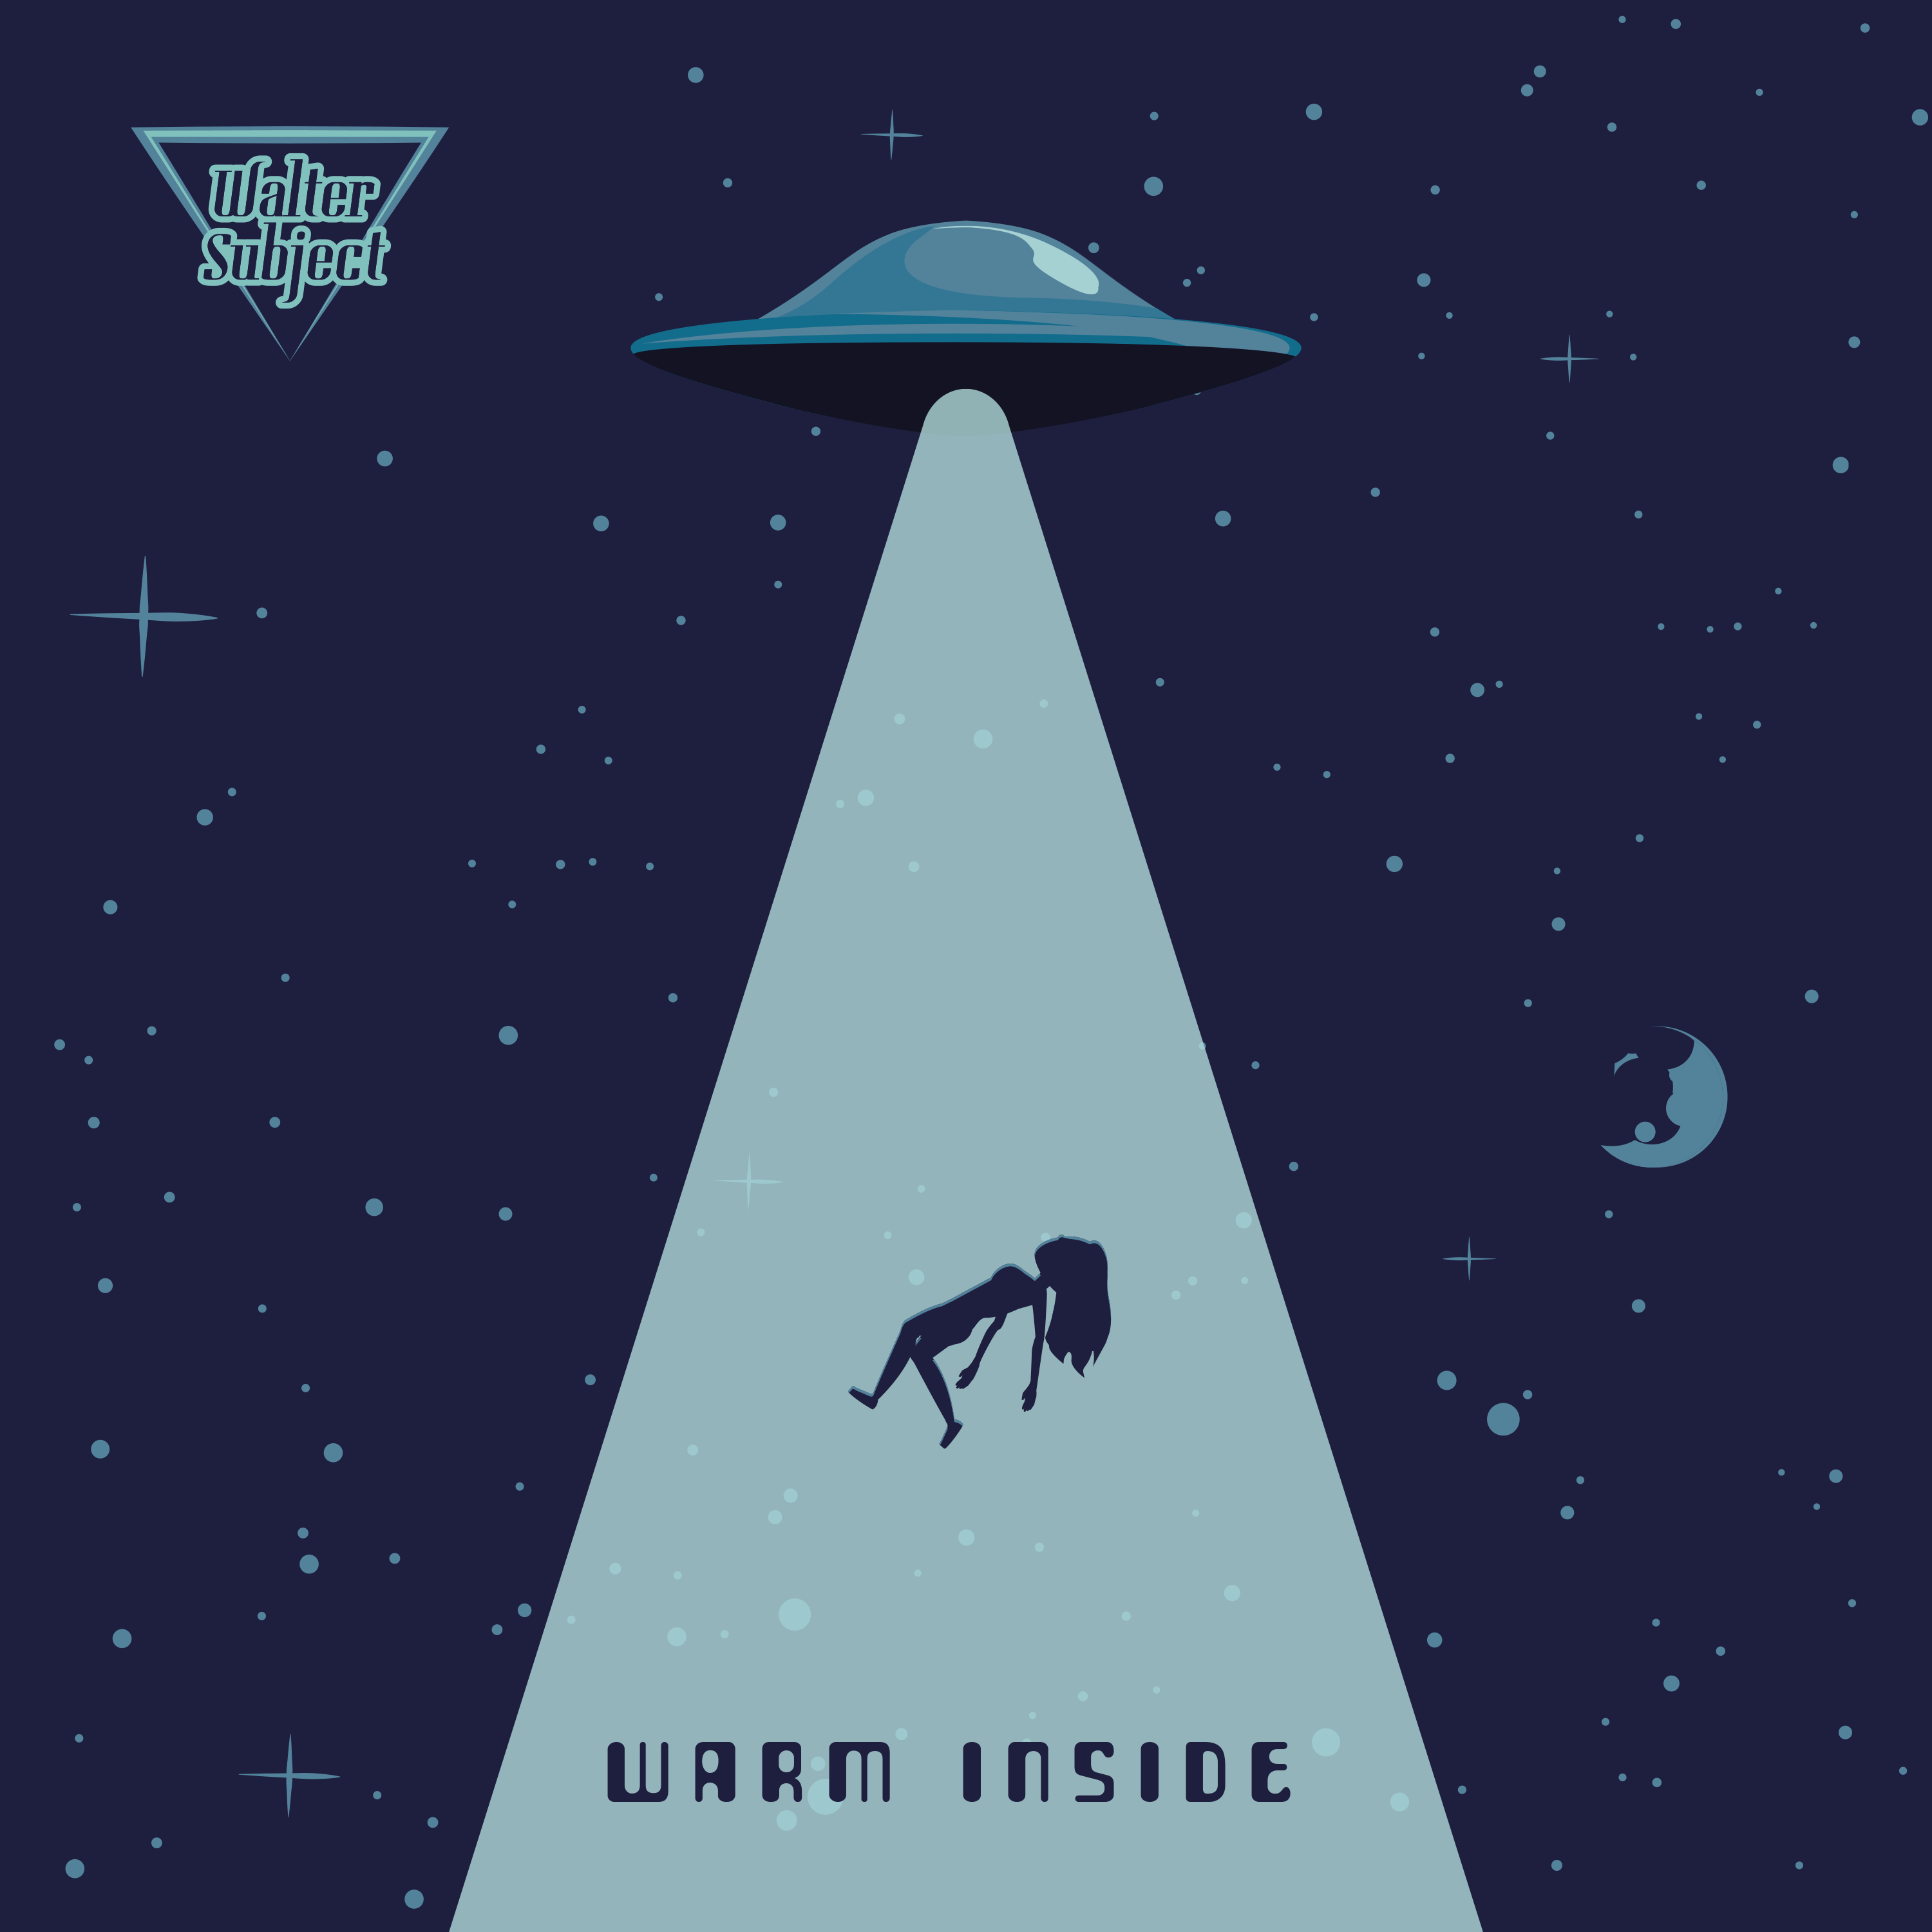 New Single: WARM INSIDE is now available on all platforms!